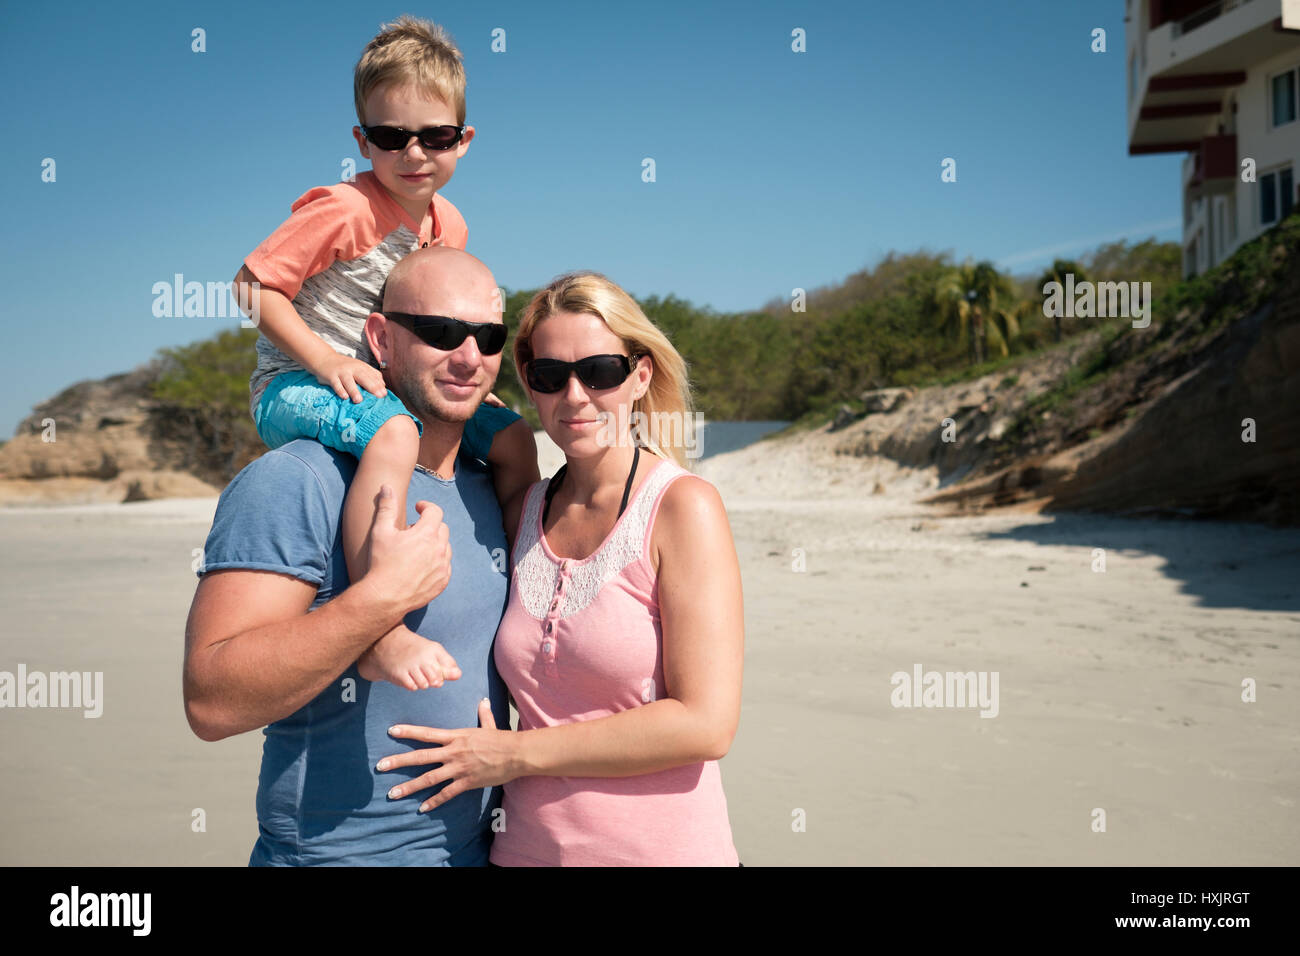 Family of 3 on the a beach, father - mother - toddler child Stock Photo